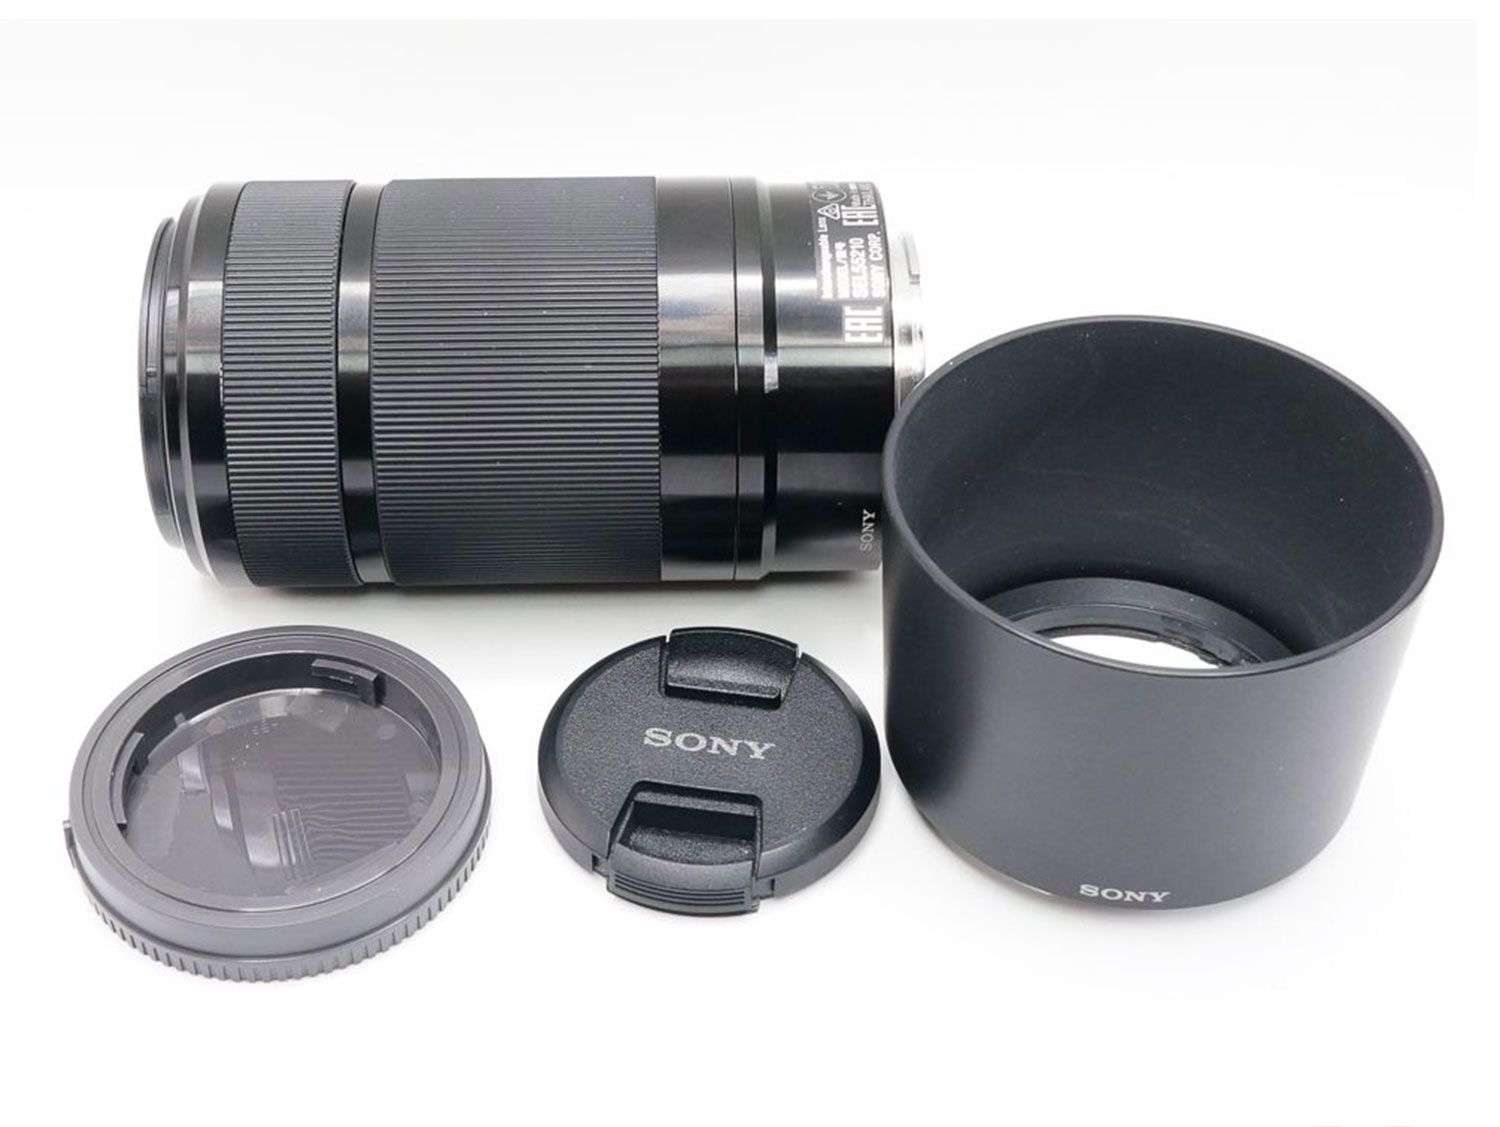 Sony E 55-210mm F4.5-6.3 Lens - Front View